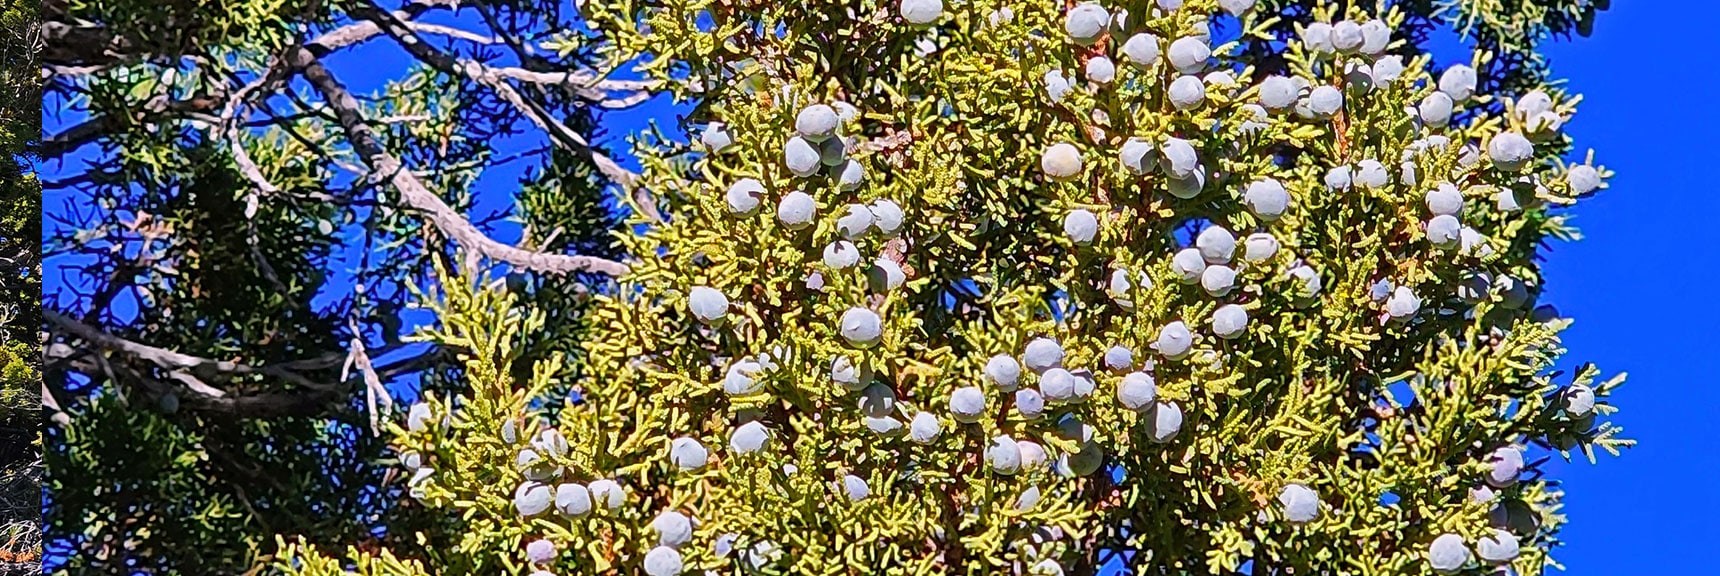 Juniper Berries. Some Are Edible, But Research Well Before Swallowing!! | Griffith Shadow Loop | Lovell Canyon, Nevada